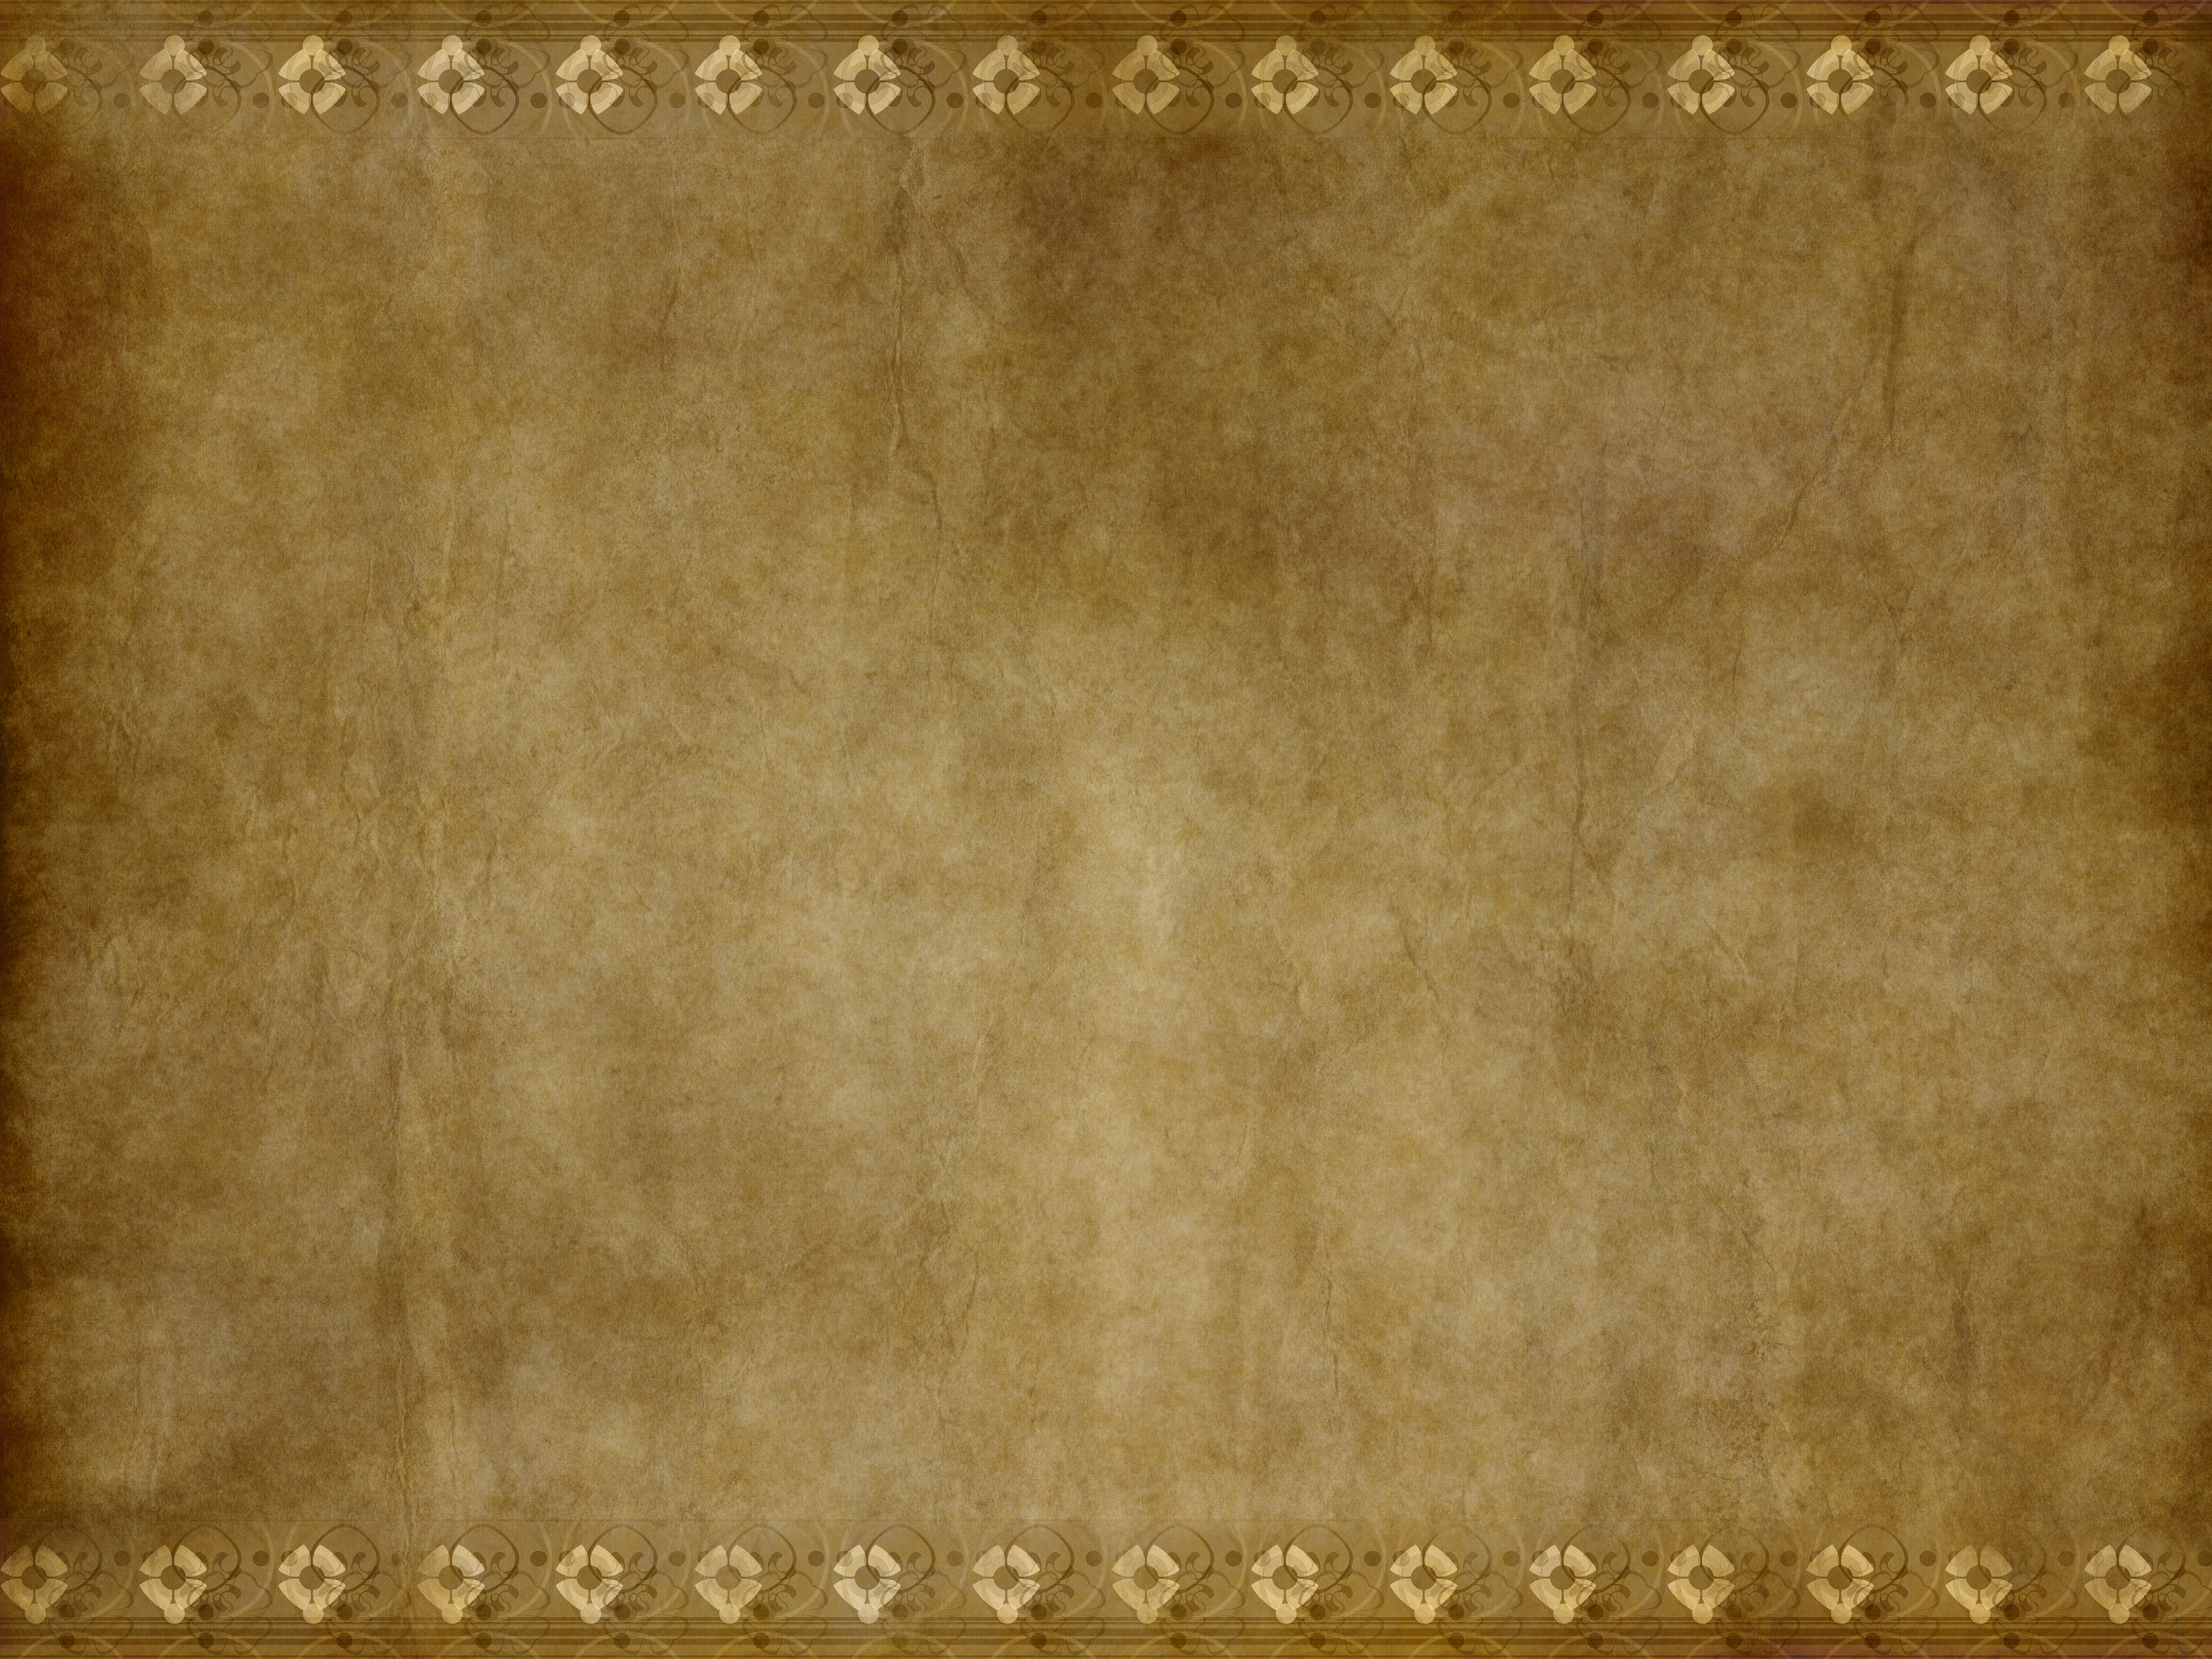 An old and worn out parchment paper background texture